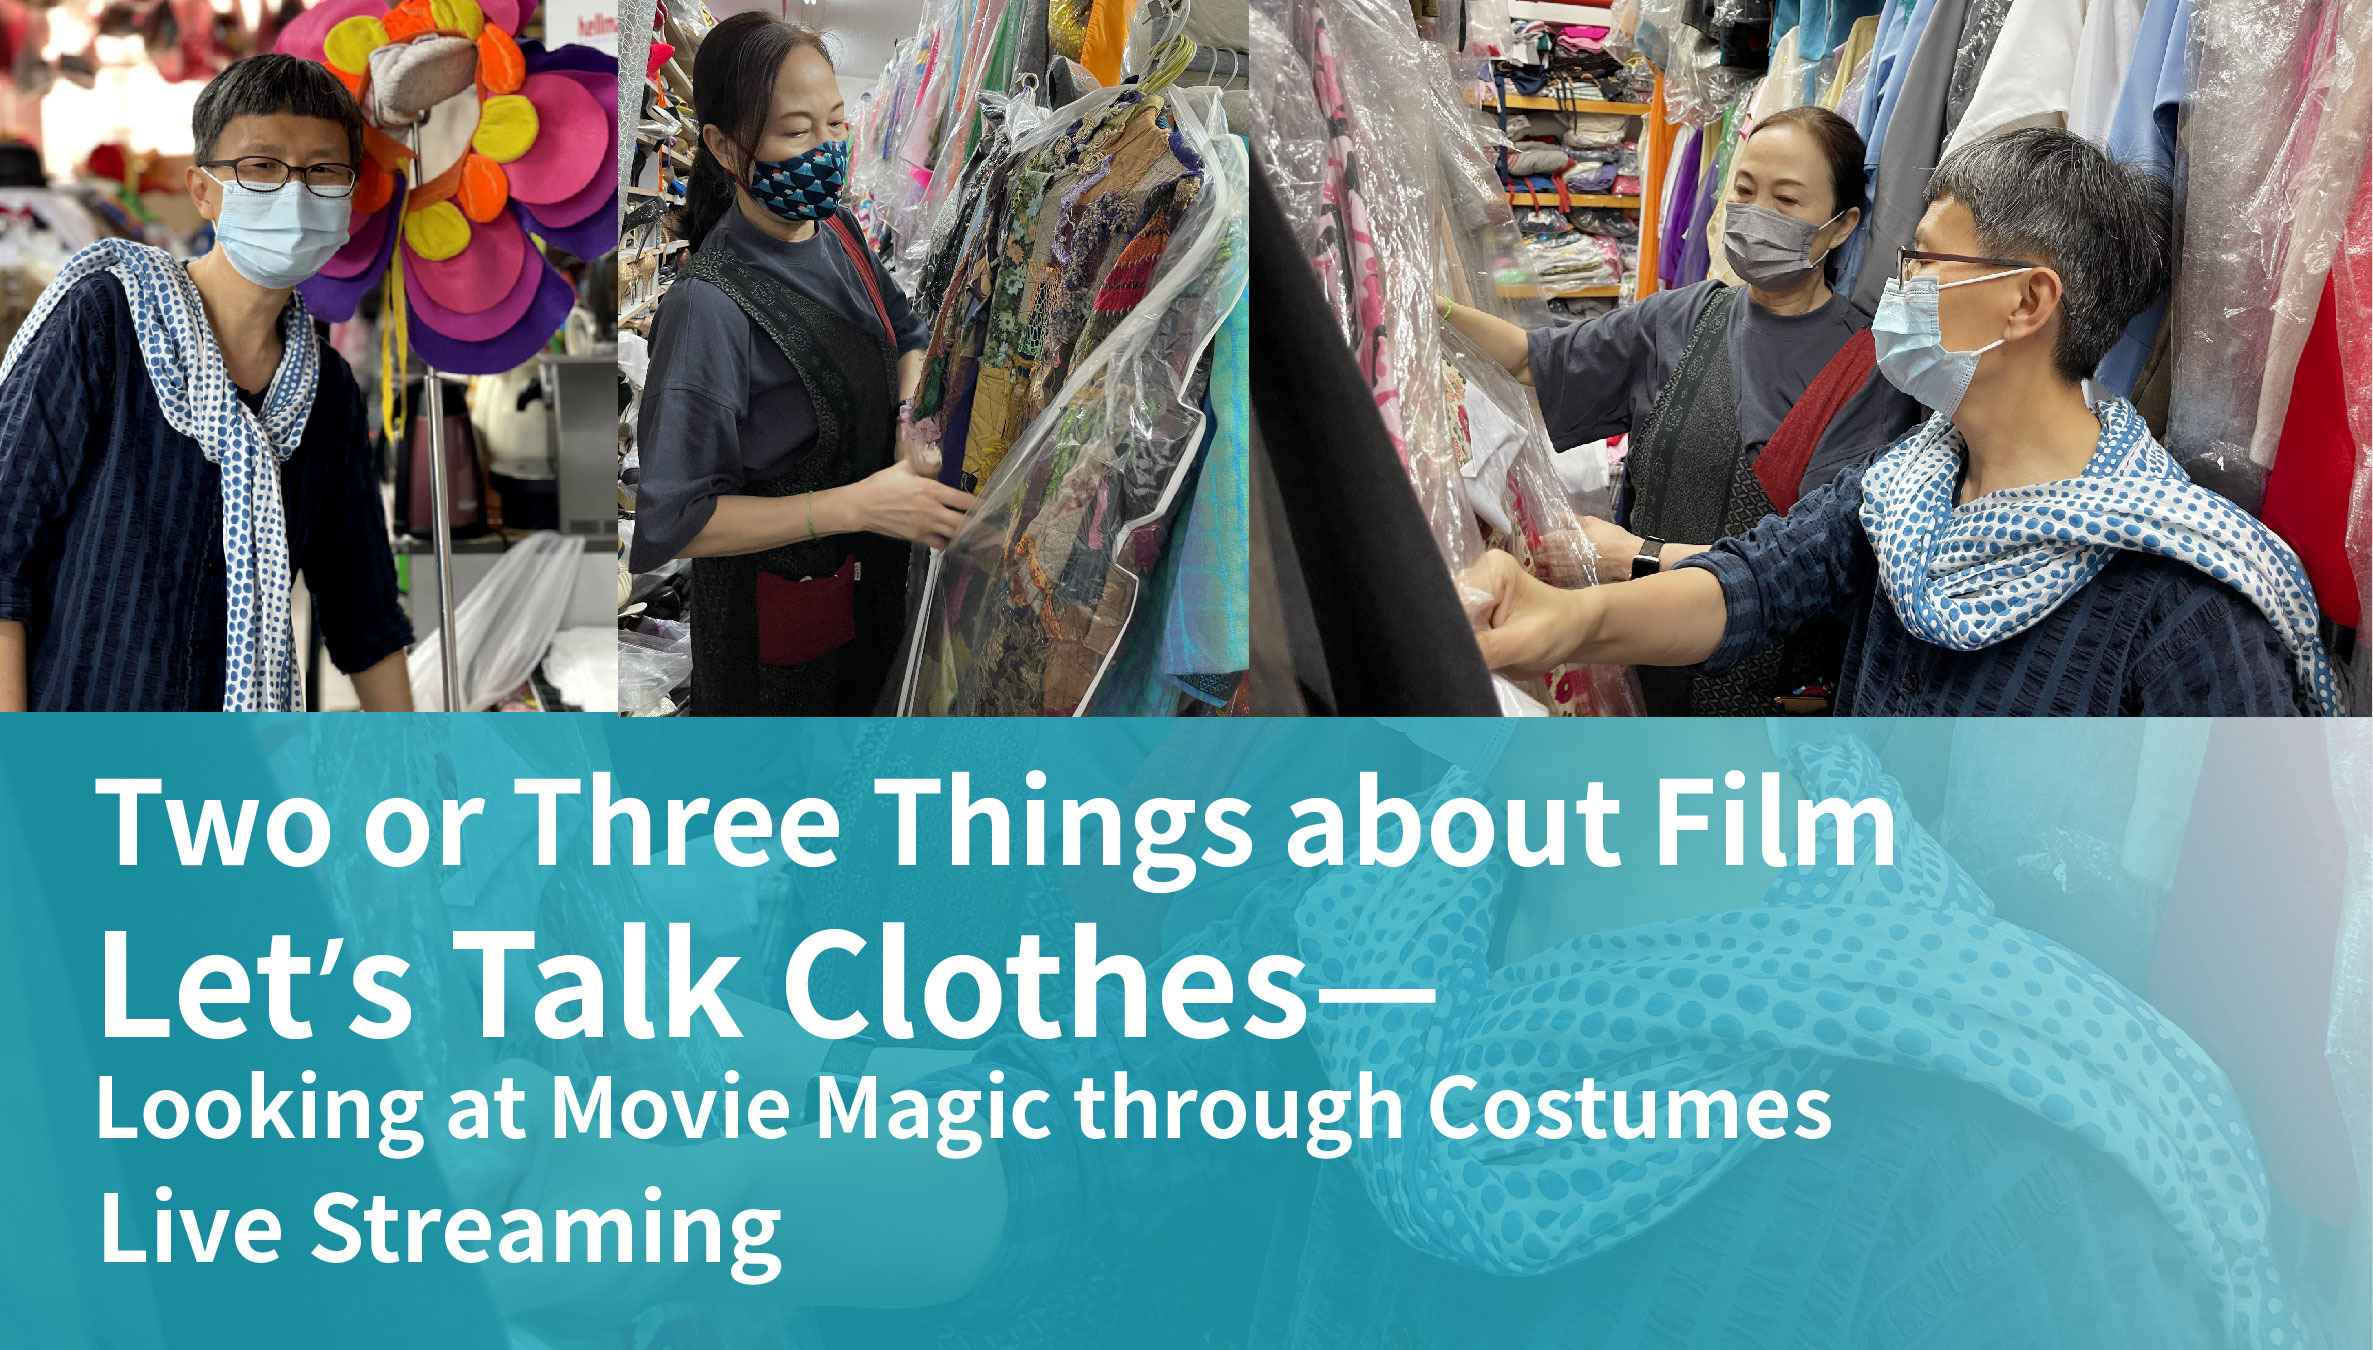 Two or Three Things about Film Let's Talk Clothes—Looking at Movie Magic through Costumes Live Streaming